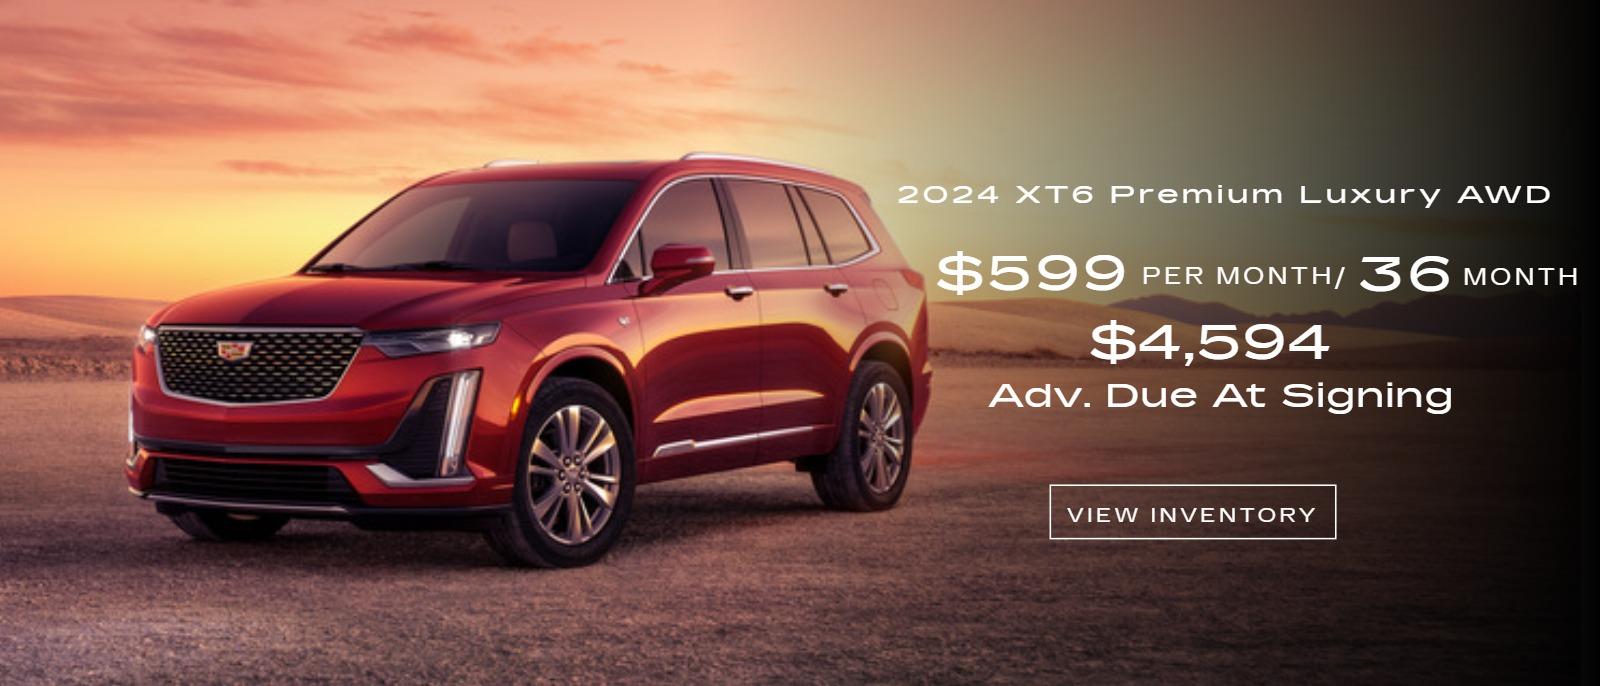 2024 XT6 Premium Luxury AWD
$599 Per Month/36 months
$4,594 Adv. Due At Signing